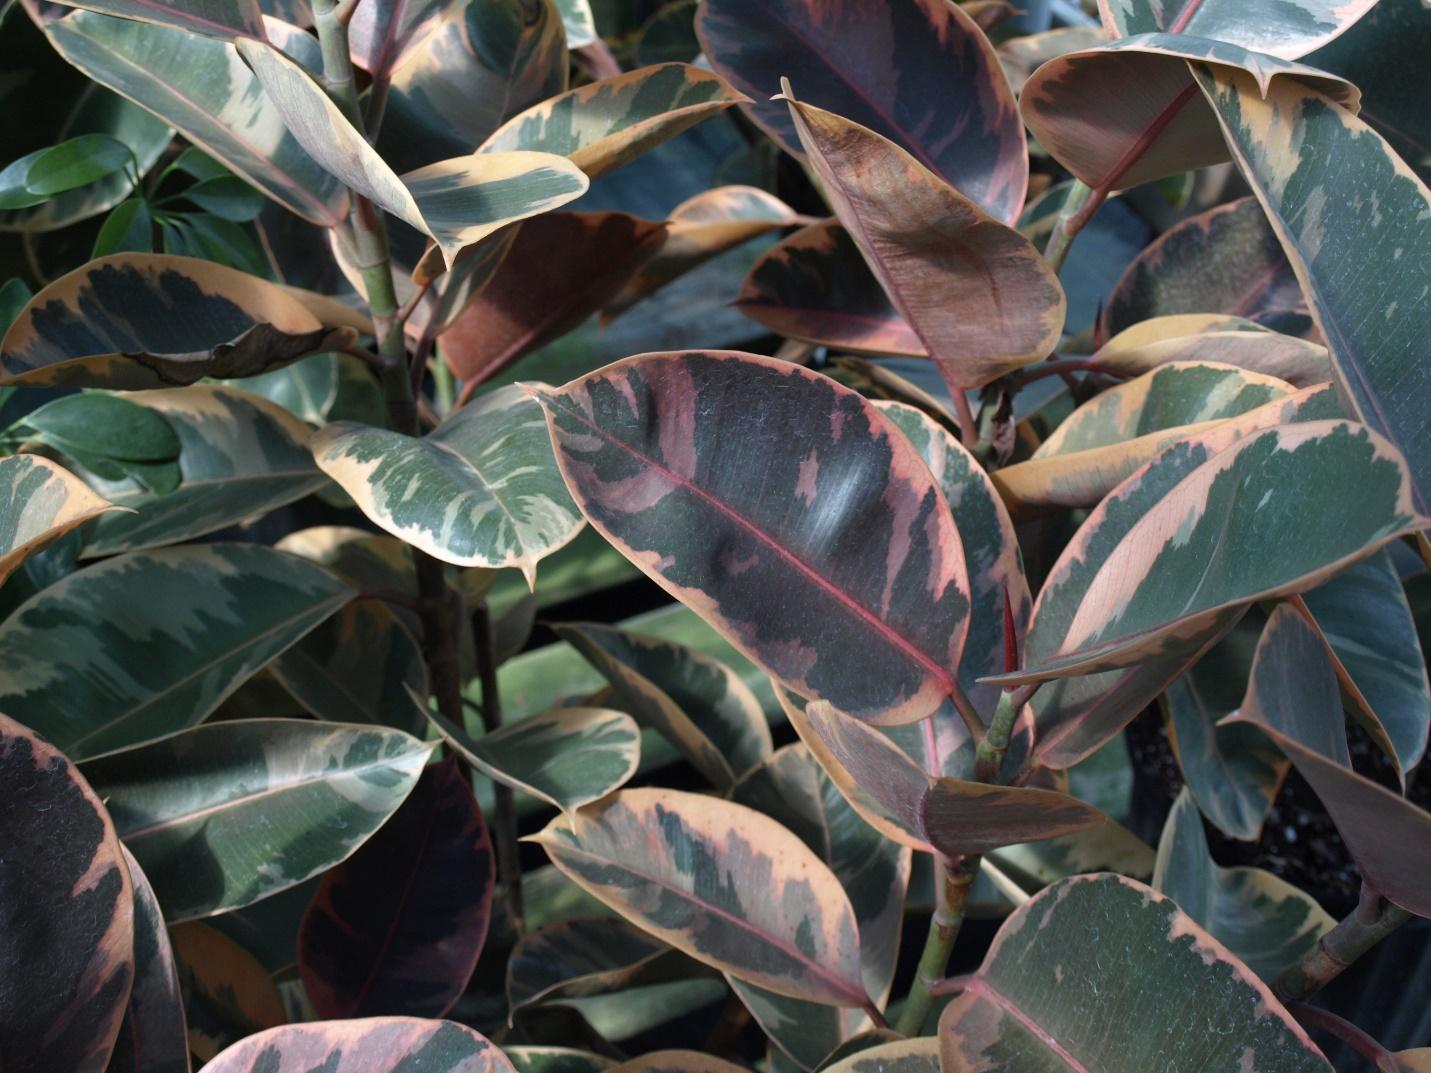 A close up of Variegated Rubber Plant